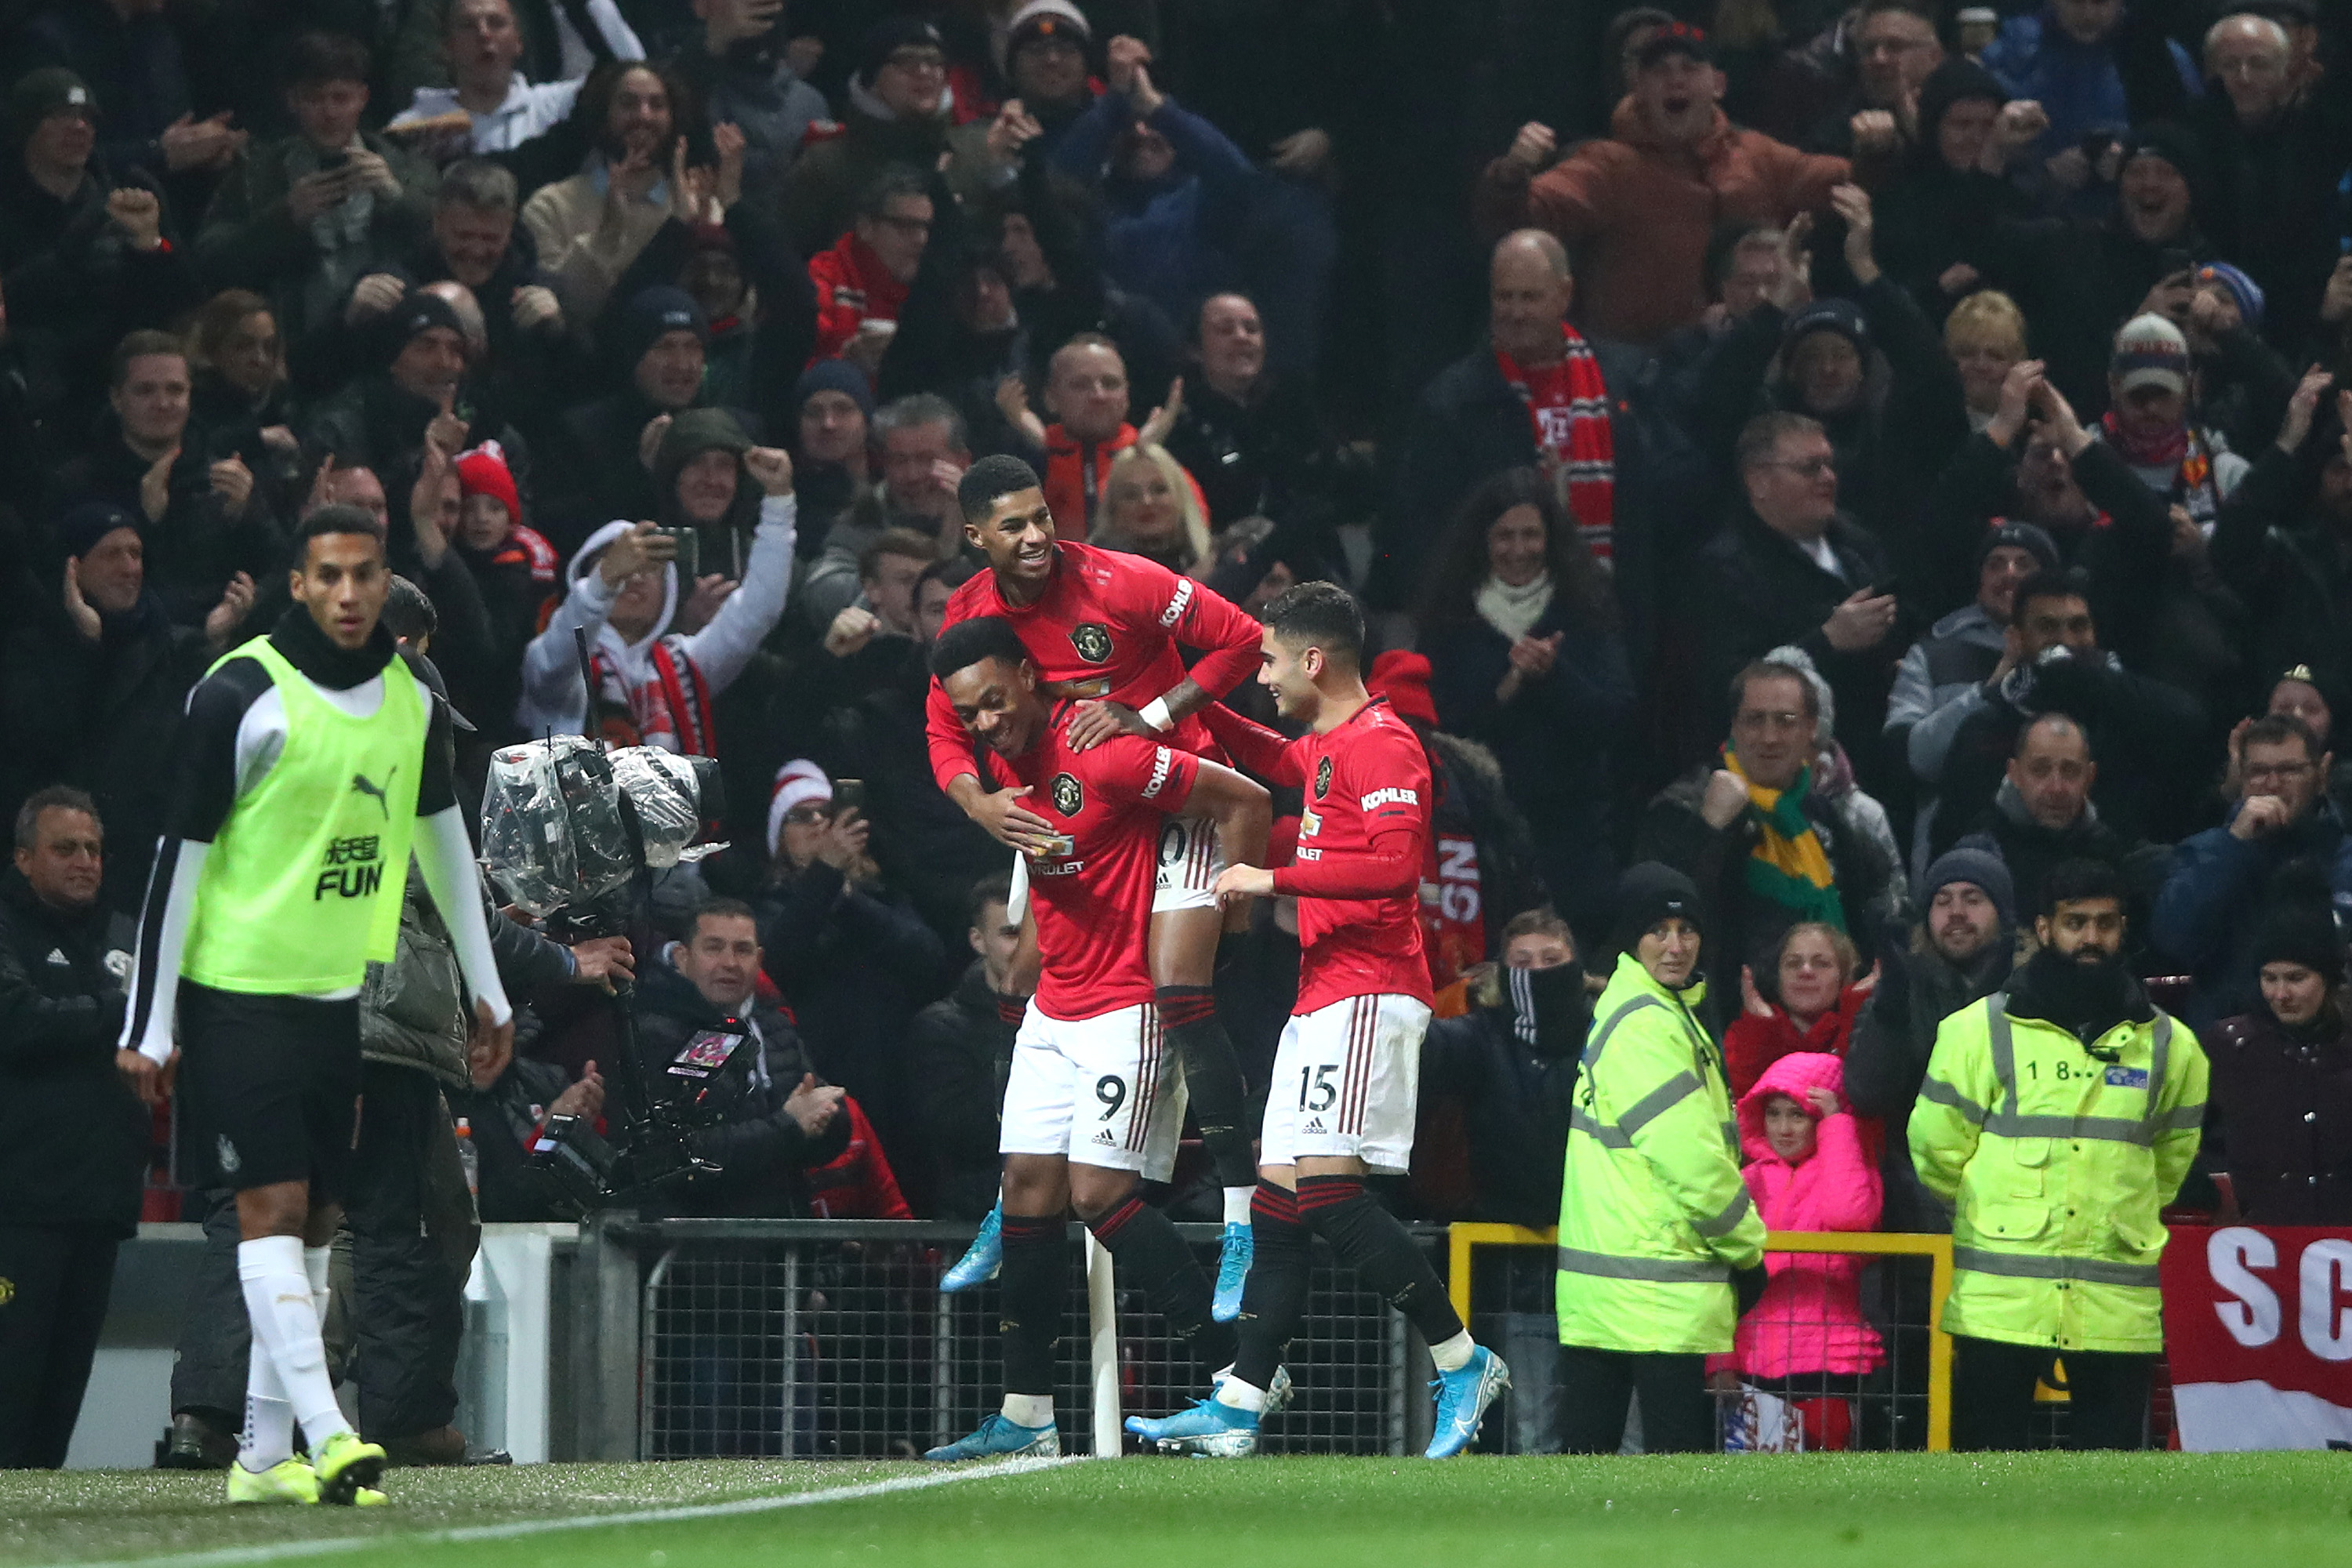 MANCHESTER, ENGLAND - DECEMBER 26: Anthony Martial of Manchester United celebrates with teammates after scoring his team's fourth goal during the Premier League match between Manchester United and Newcastle United at Old Trafford on December 26, 2019 in Manchester, United Kingdom. (Photo by Clive Brunskill/Getty Images)